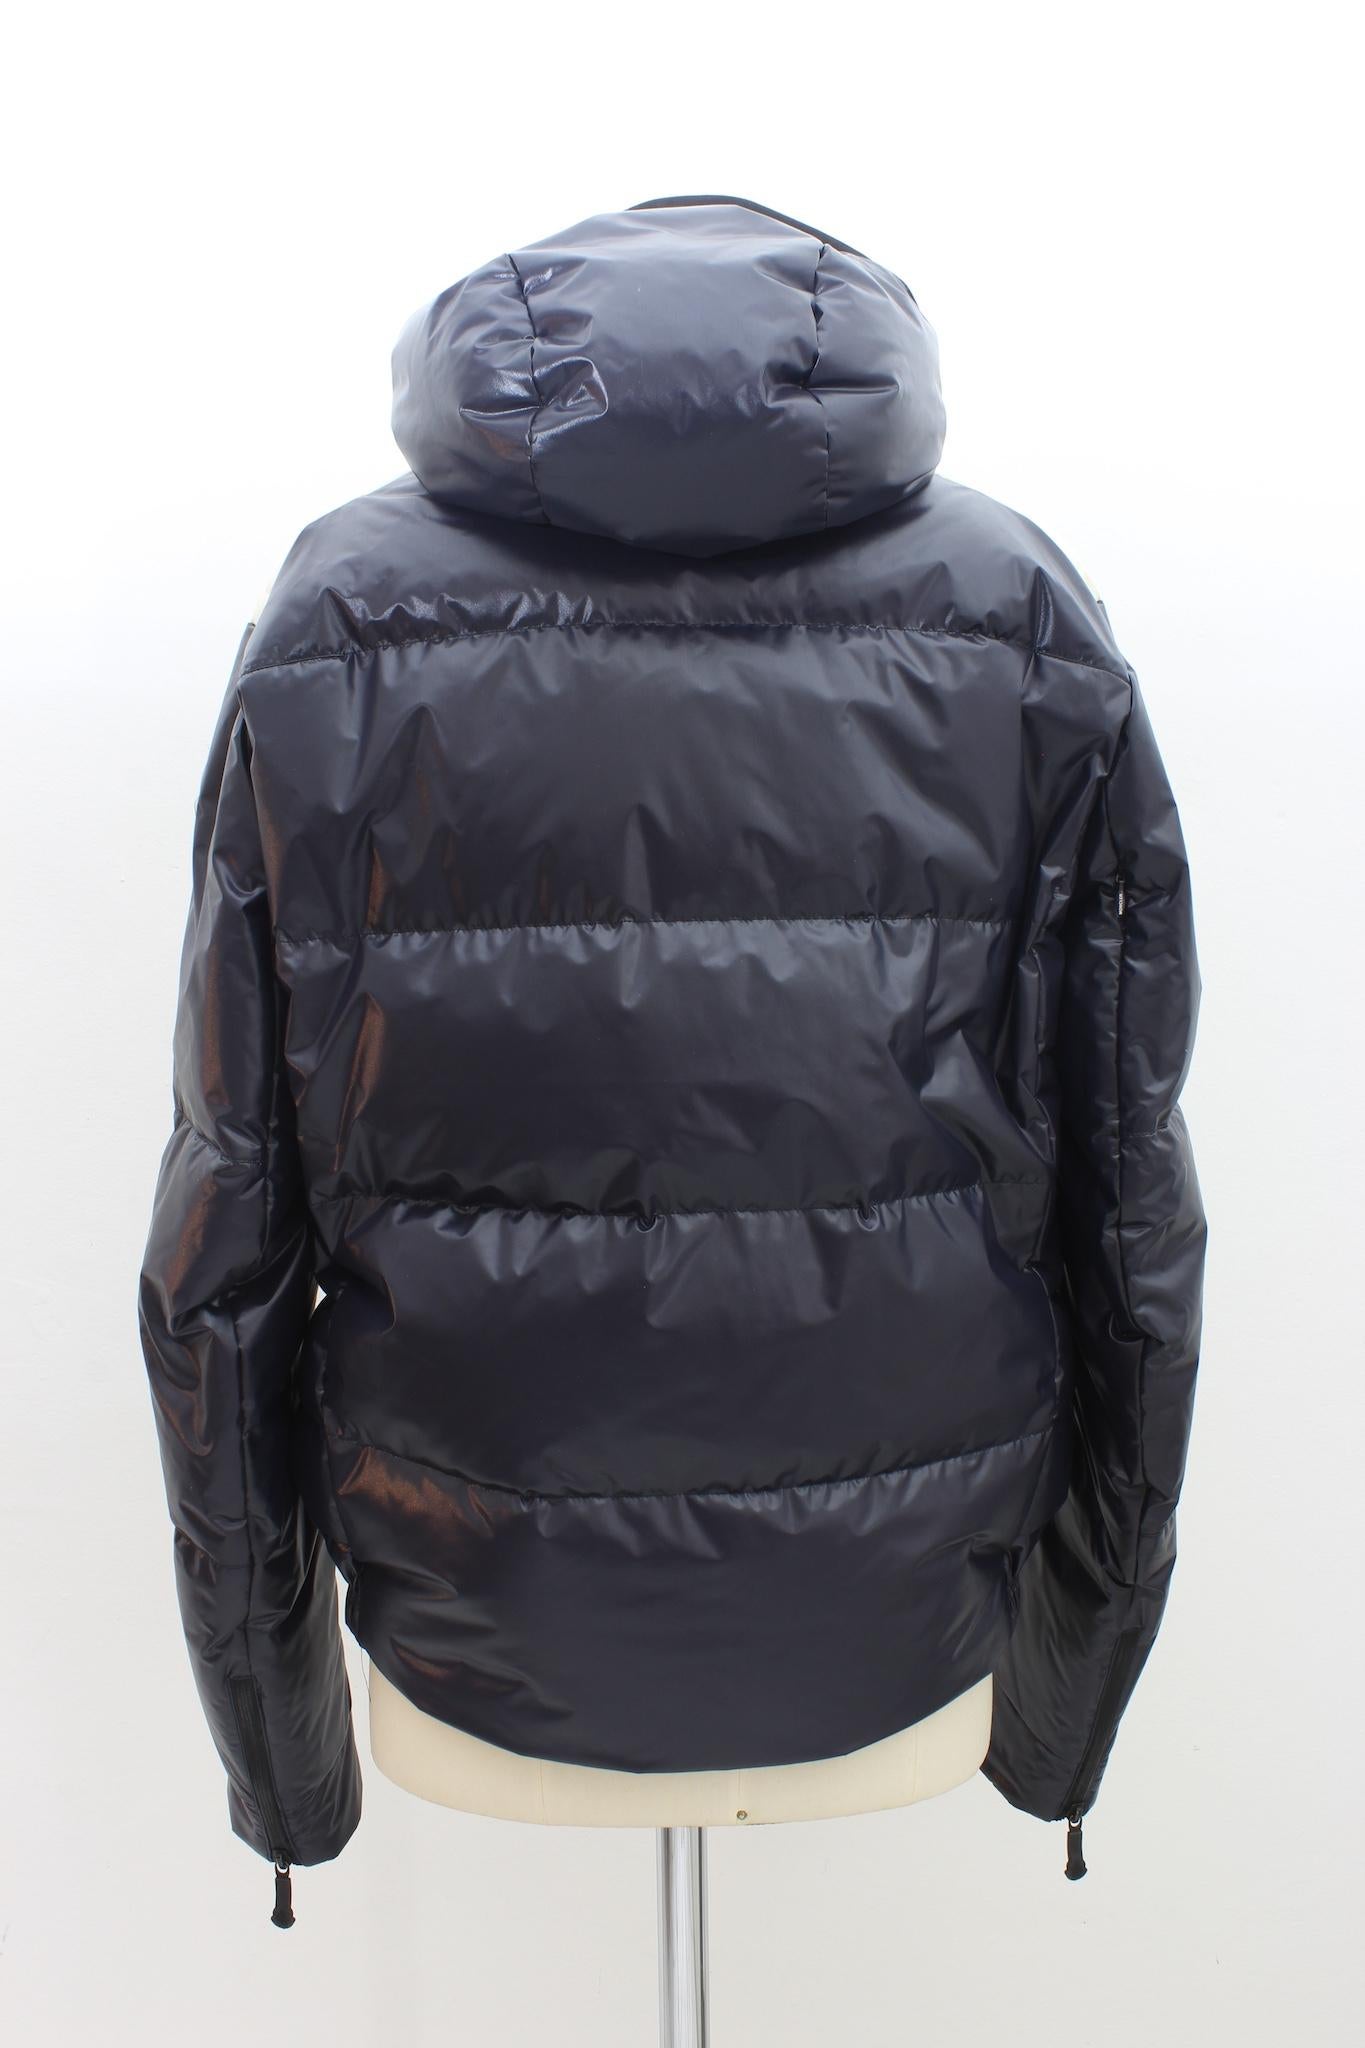 Moncler ski blouson jacket. Bomber black jacket, padded with real goose down, removable hood, internally there are various pockets. Zipper and button closure, Go Stop Air Water model. External fabric 50% polyamide, 50% polyurethane.

Size: